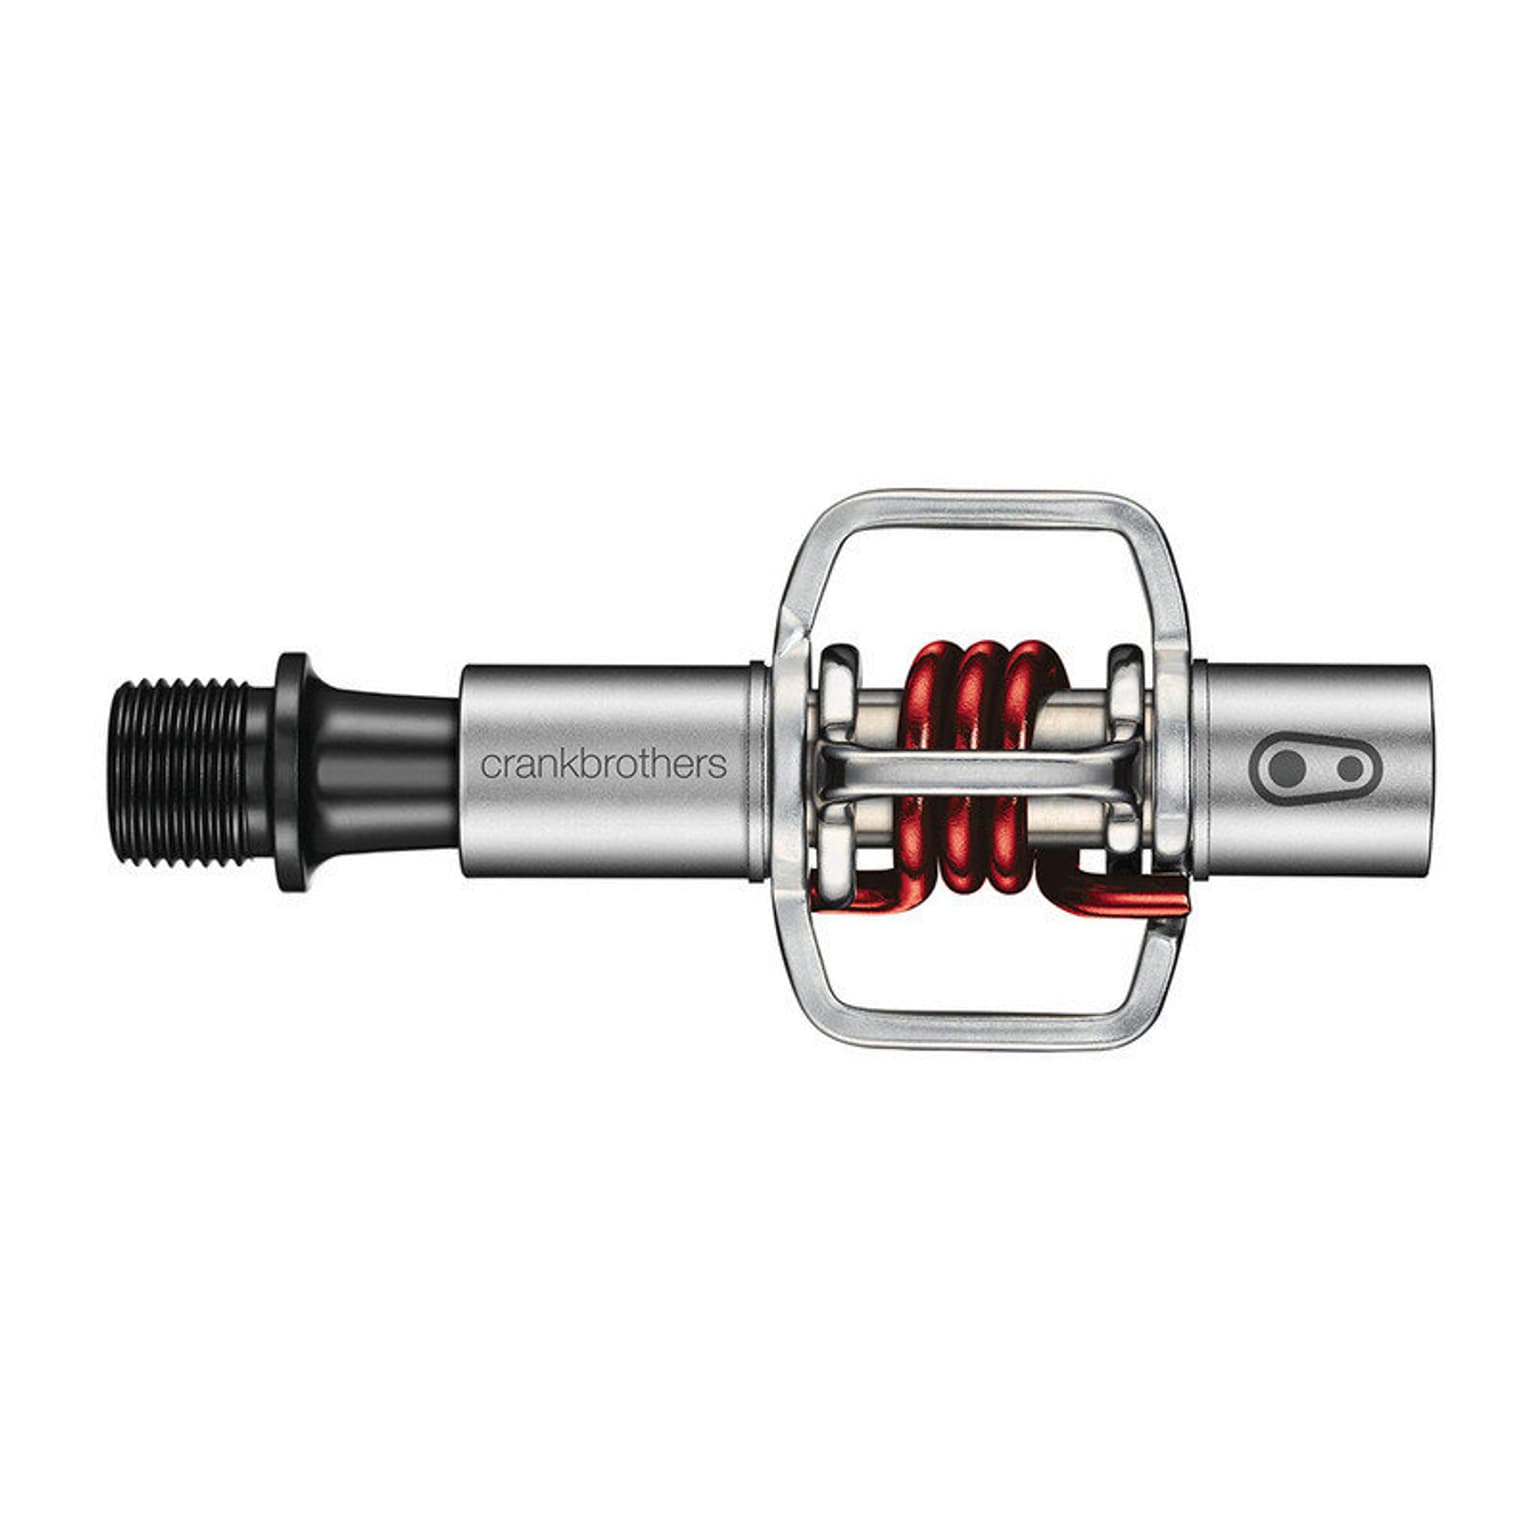 crankbrothers Pedal Egg Beater 1 Velopedale 1